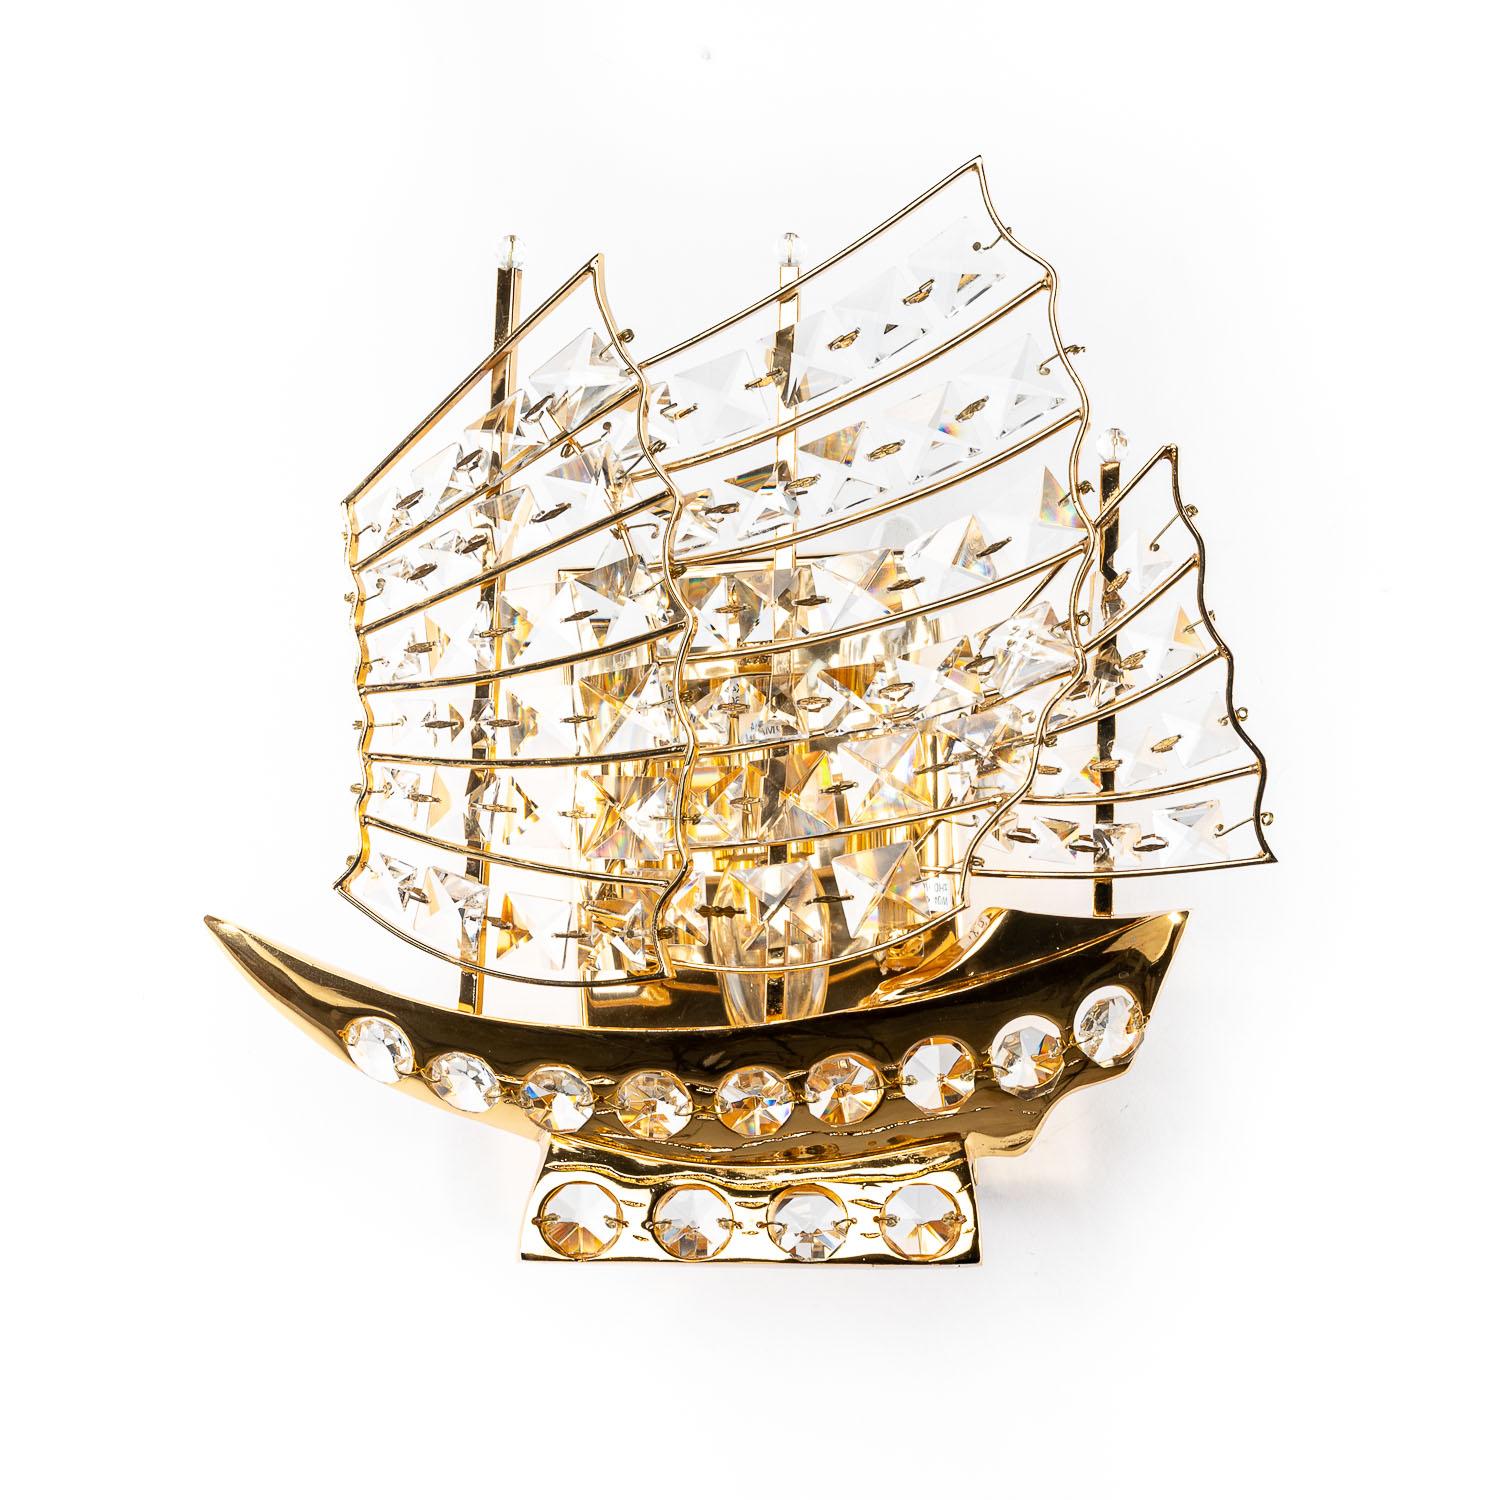 Playful piece of square crystal glass and decorated brass frame. Typical Chinese Junk boats.